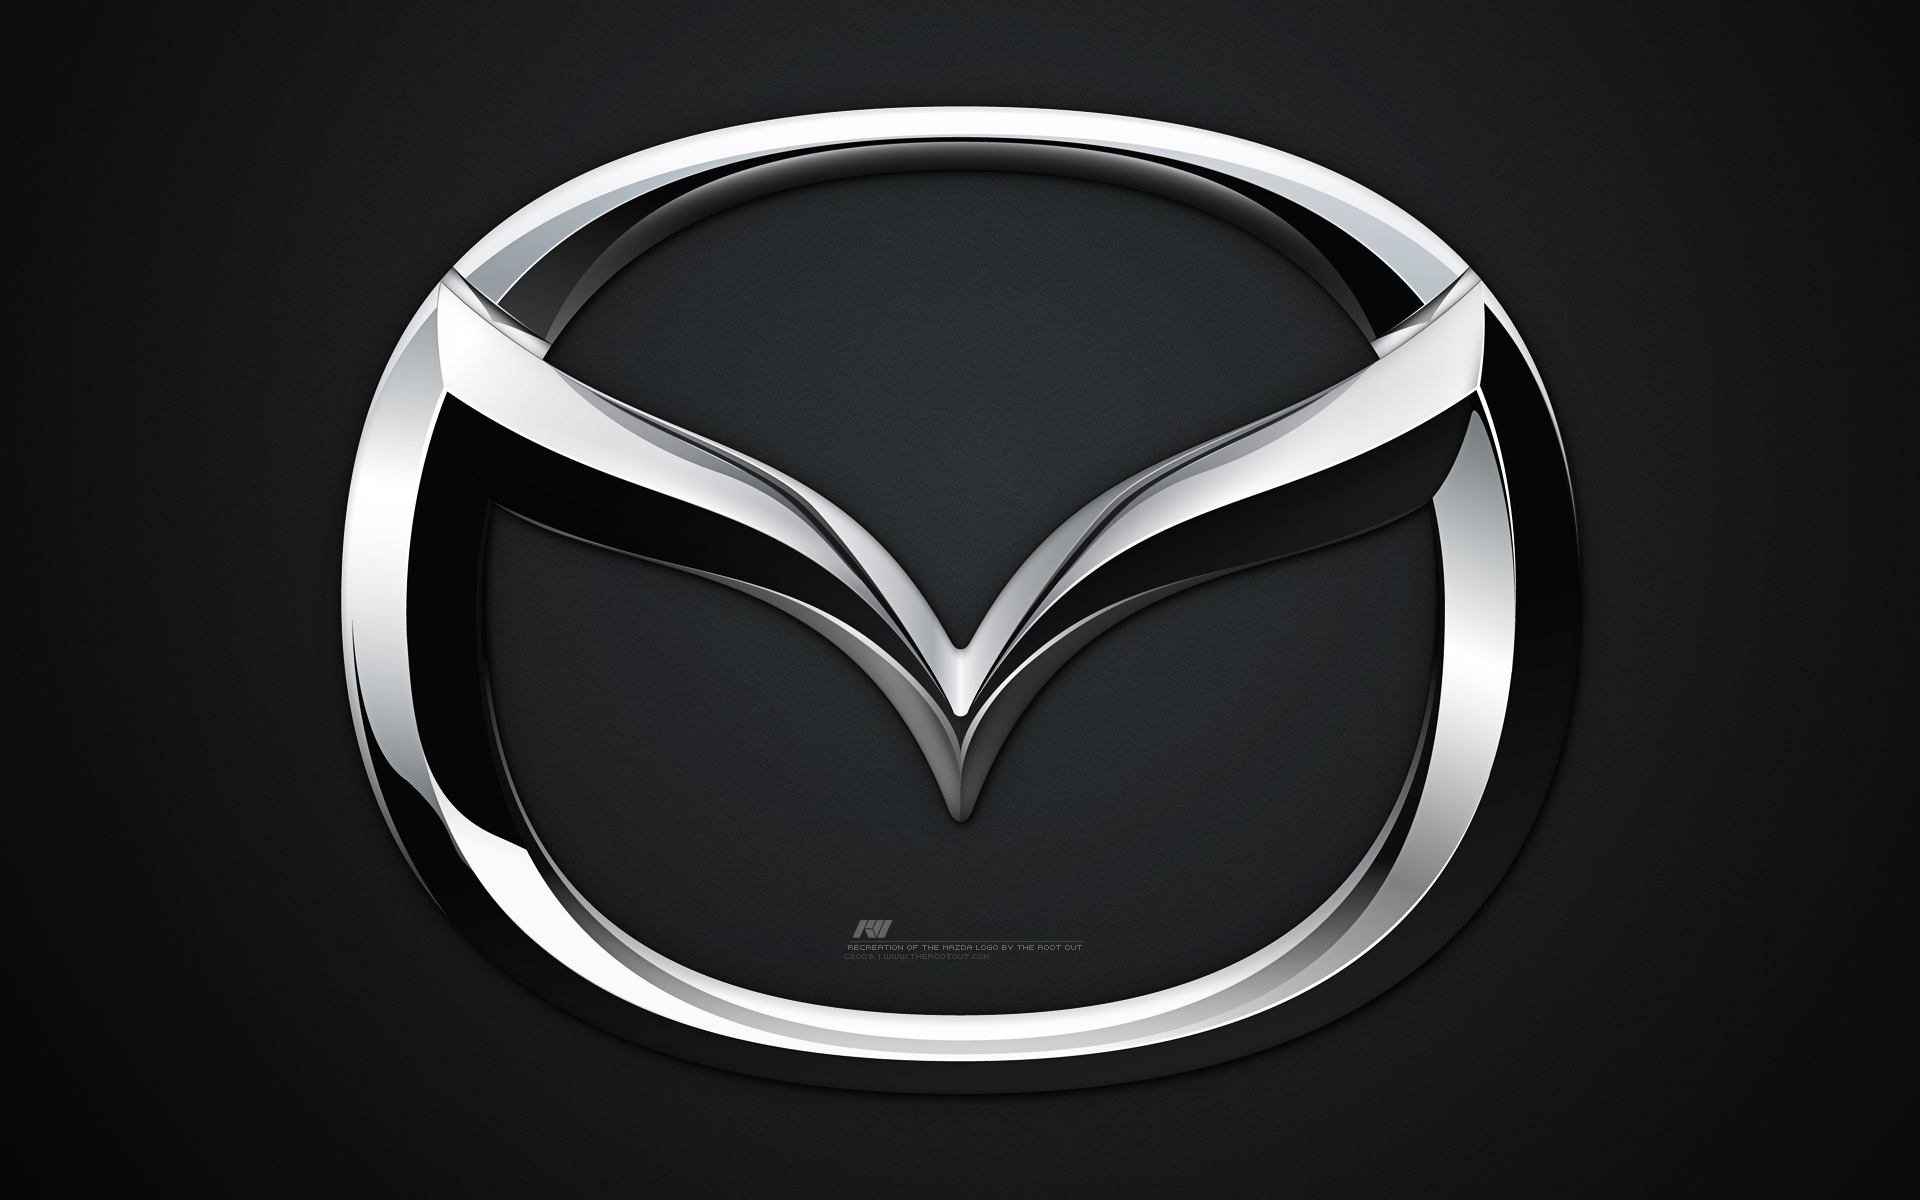 Mazda__s_Logo_Recreation_by_rootout.jpg